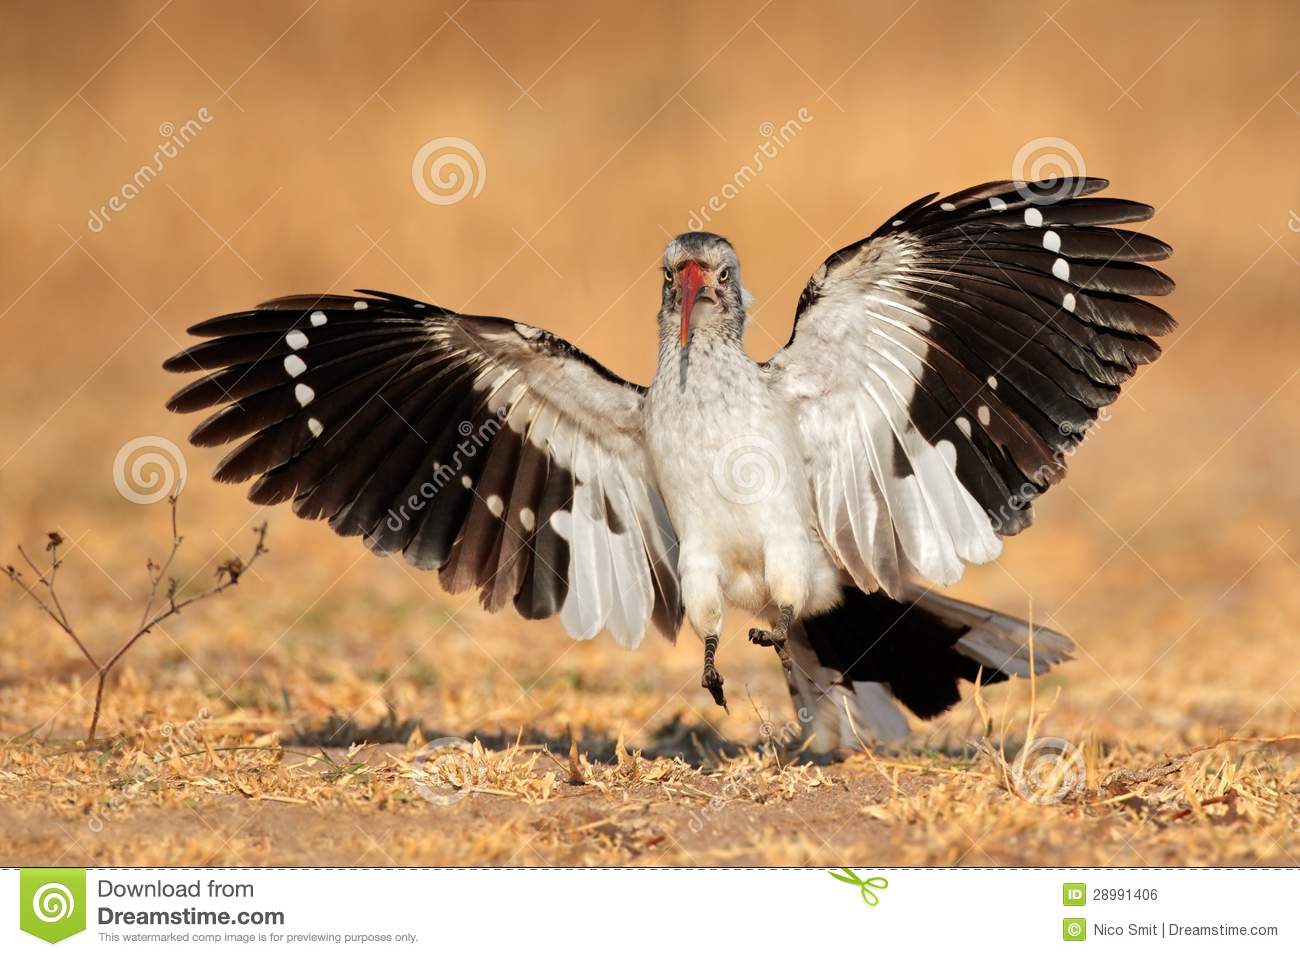 Red-billed Hornbill clipart #1, Download drawings